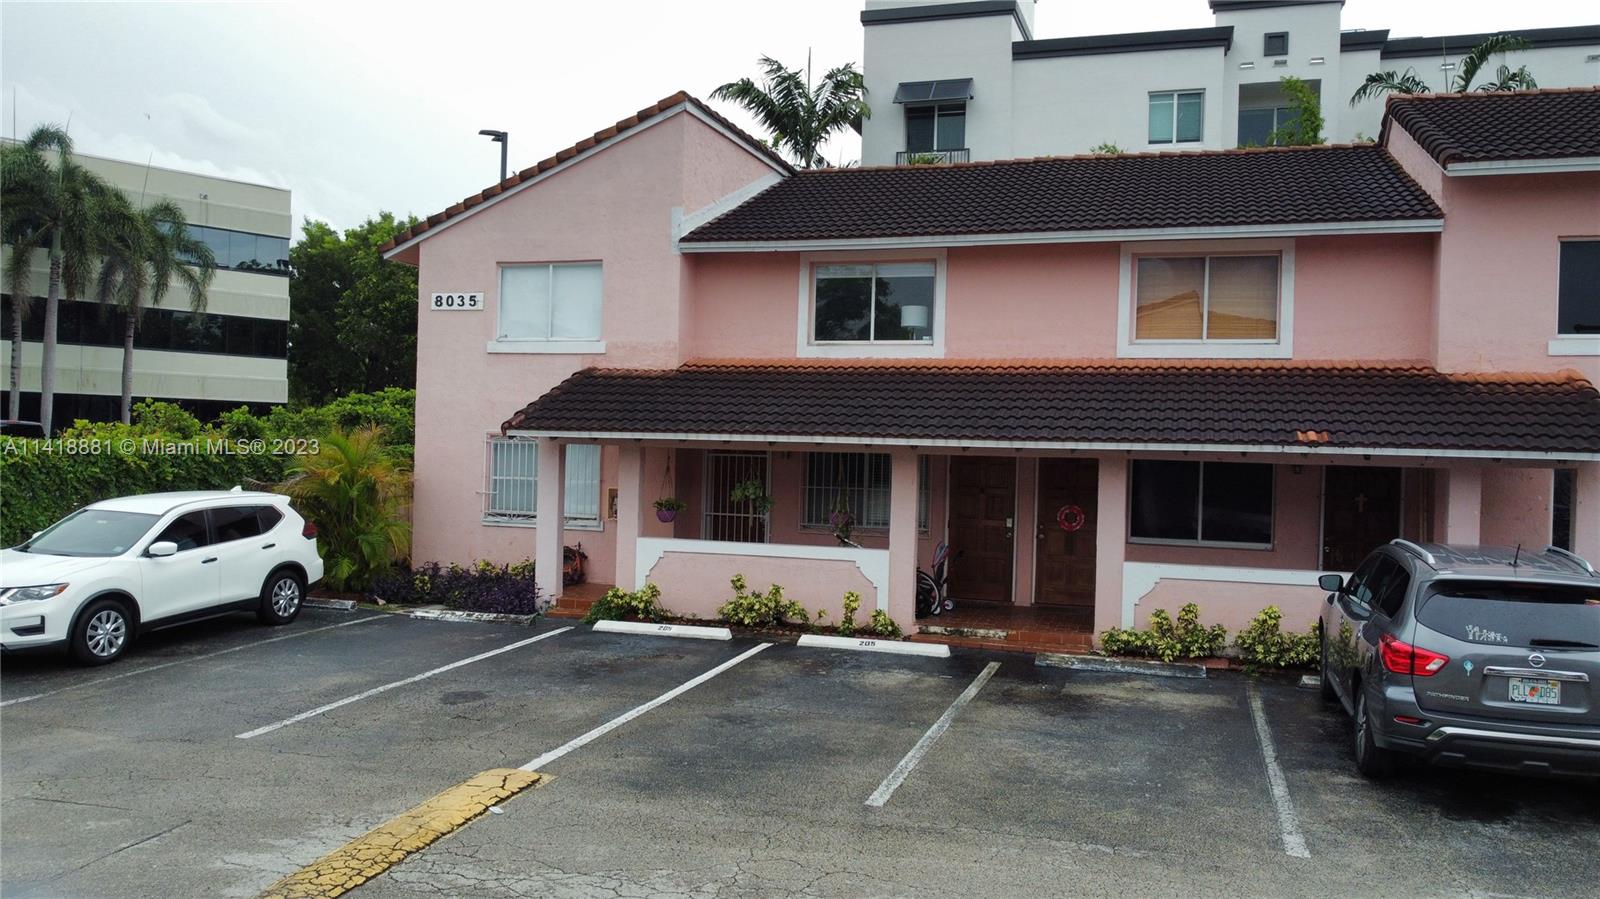 Great Condo in Doral. Great location, Doral Court, near downtown Doral with easy access to main highway. 2/2 unit, spacious open floor plan that combines kitchen, dinning room and living room with plenty of natural light